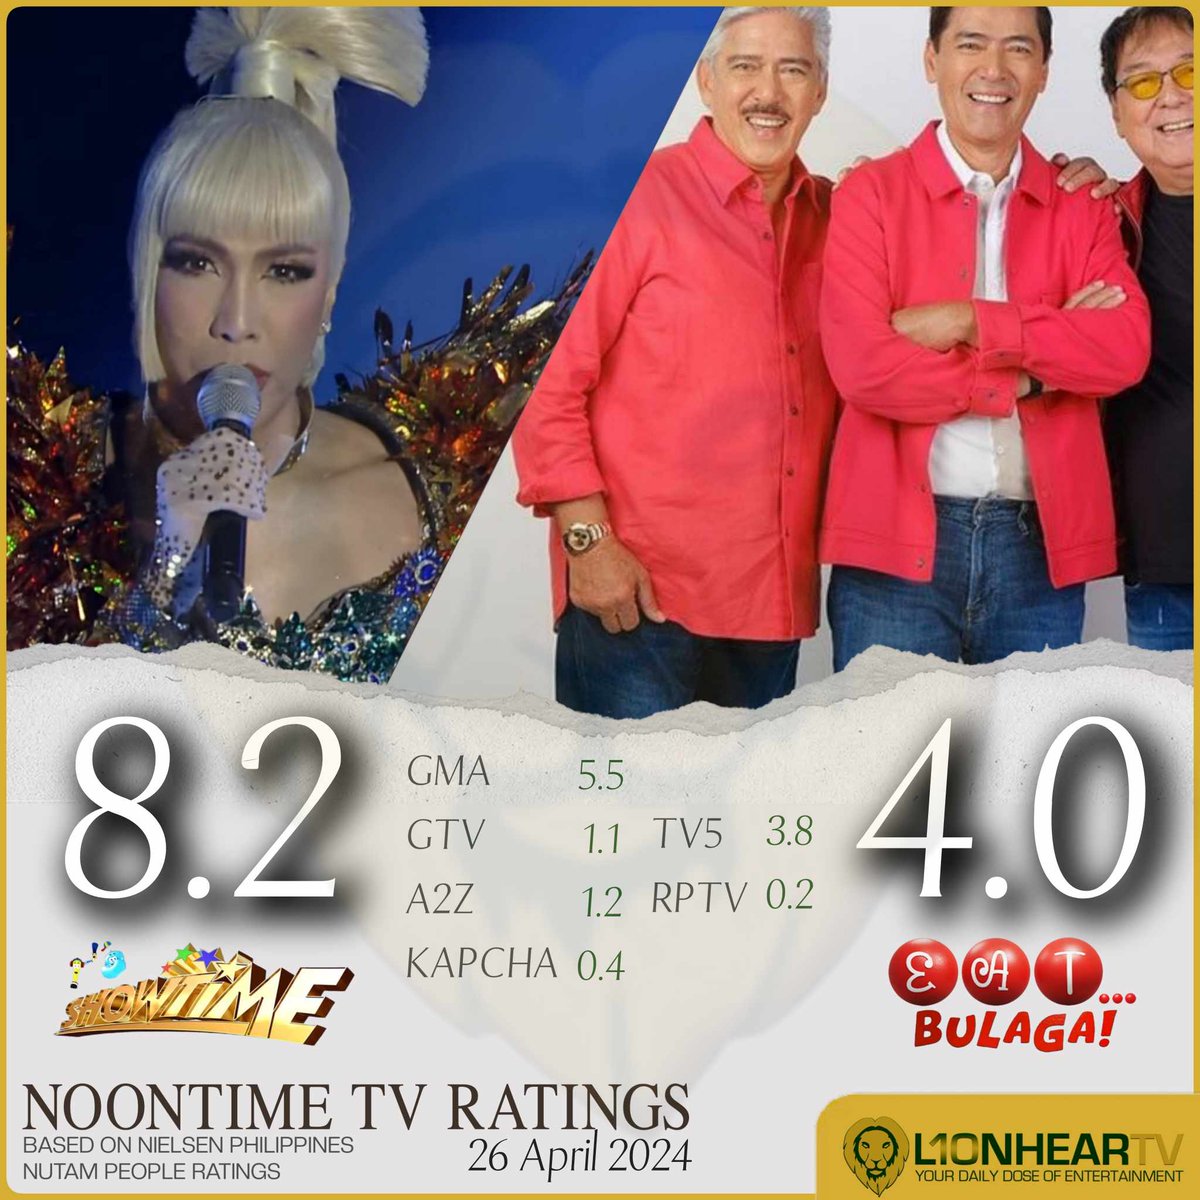 LOOK: #ItsShowtime pulled off a stellar performance in the ratings game on Friday, April 26, crushing rival show, #EATBulaga with a more than a double lead, Nielsen Philippines,  show.

MORE RATINGS: lionheartv.net/ratings